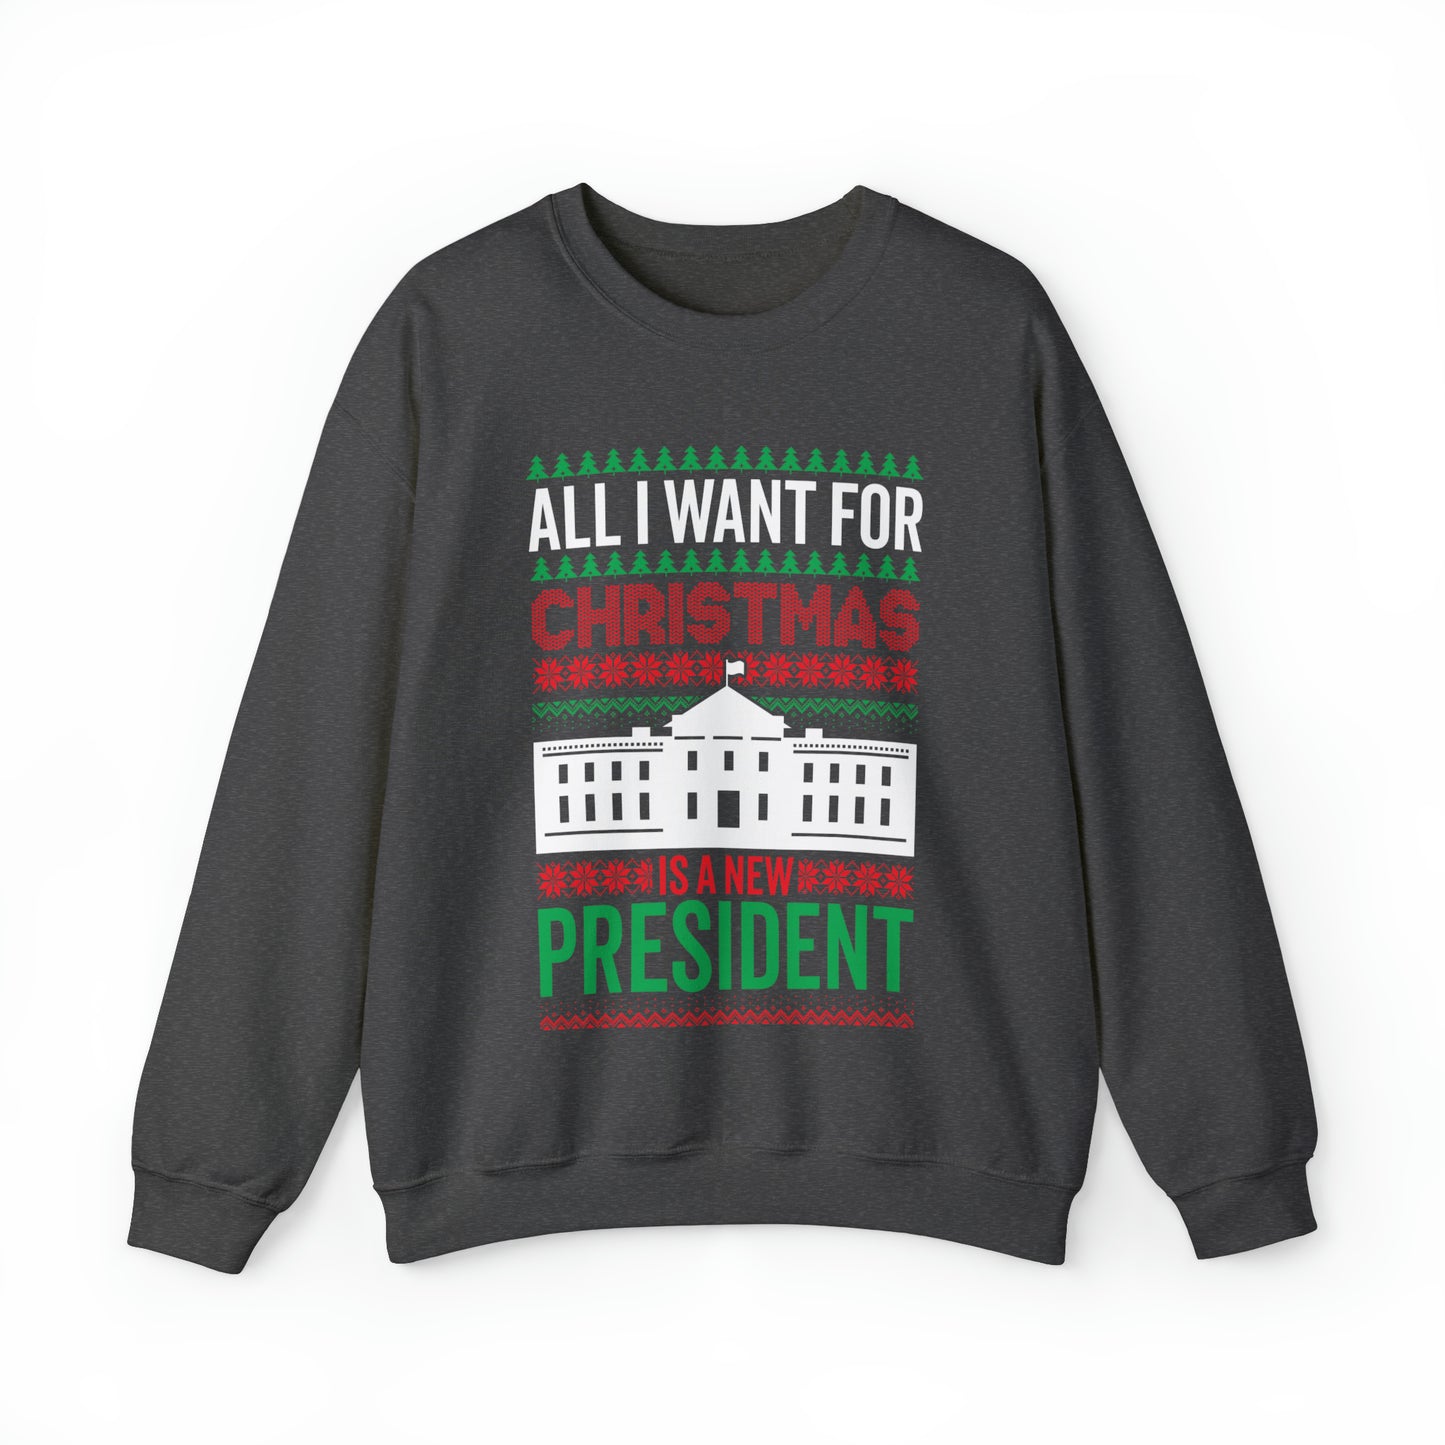 All I Want for Christmas is a New President Funny Christmas Sweatshirt Unisex Adult